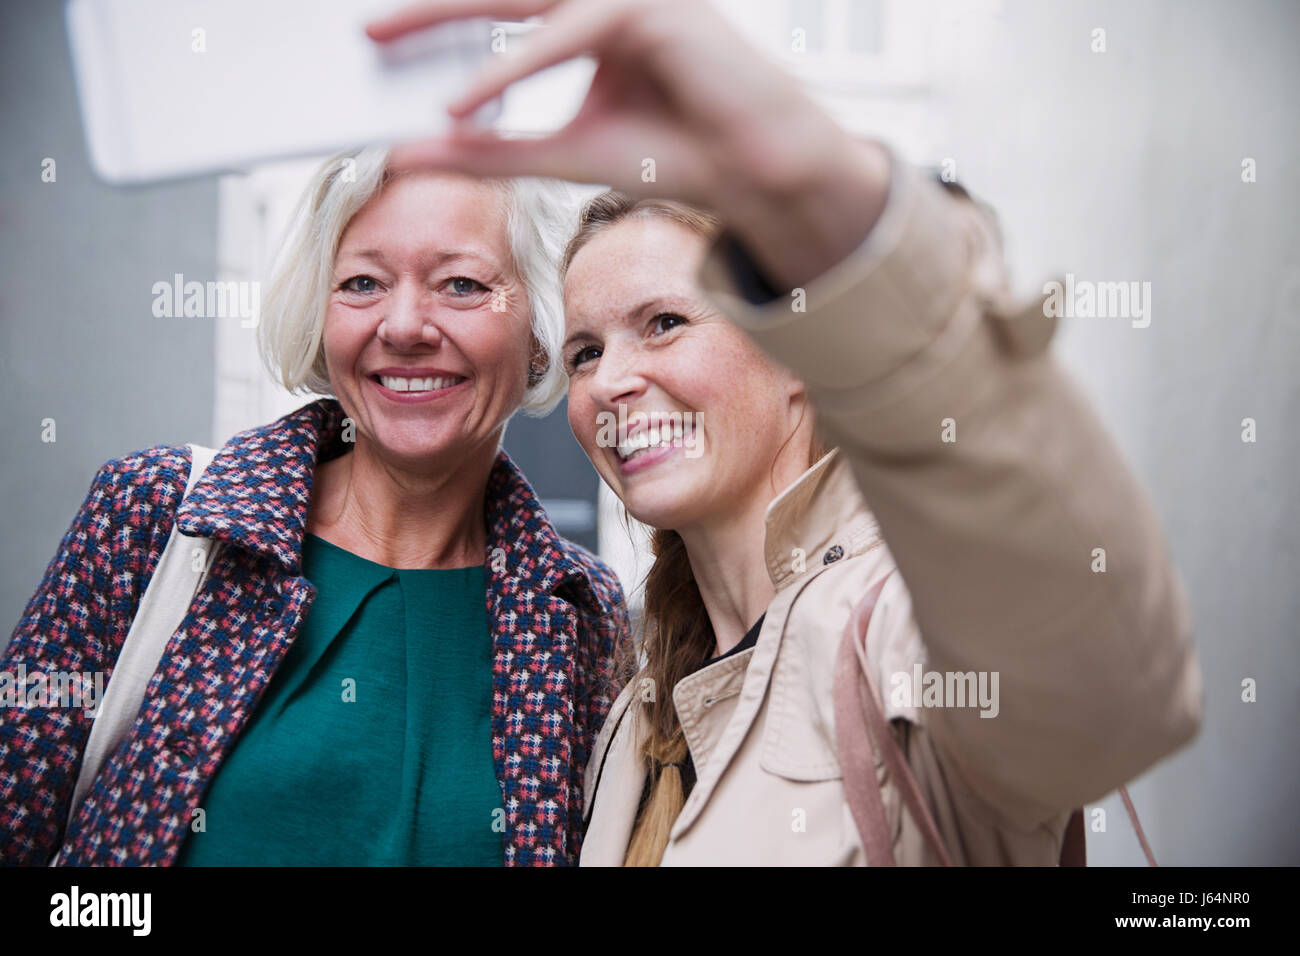 Smiling mother and daughter taking selfie with camera phone Stock Photo